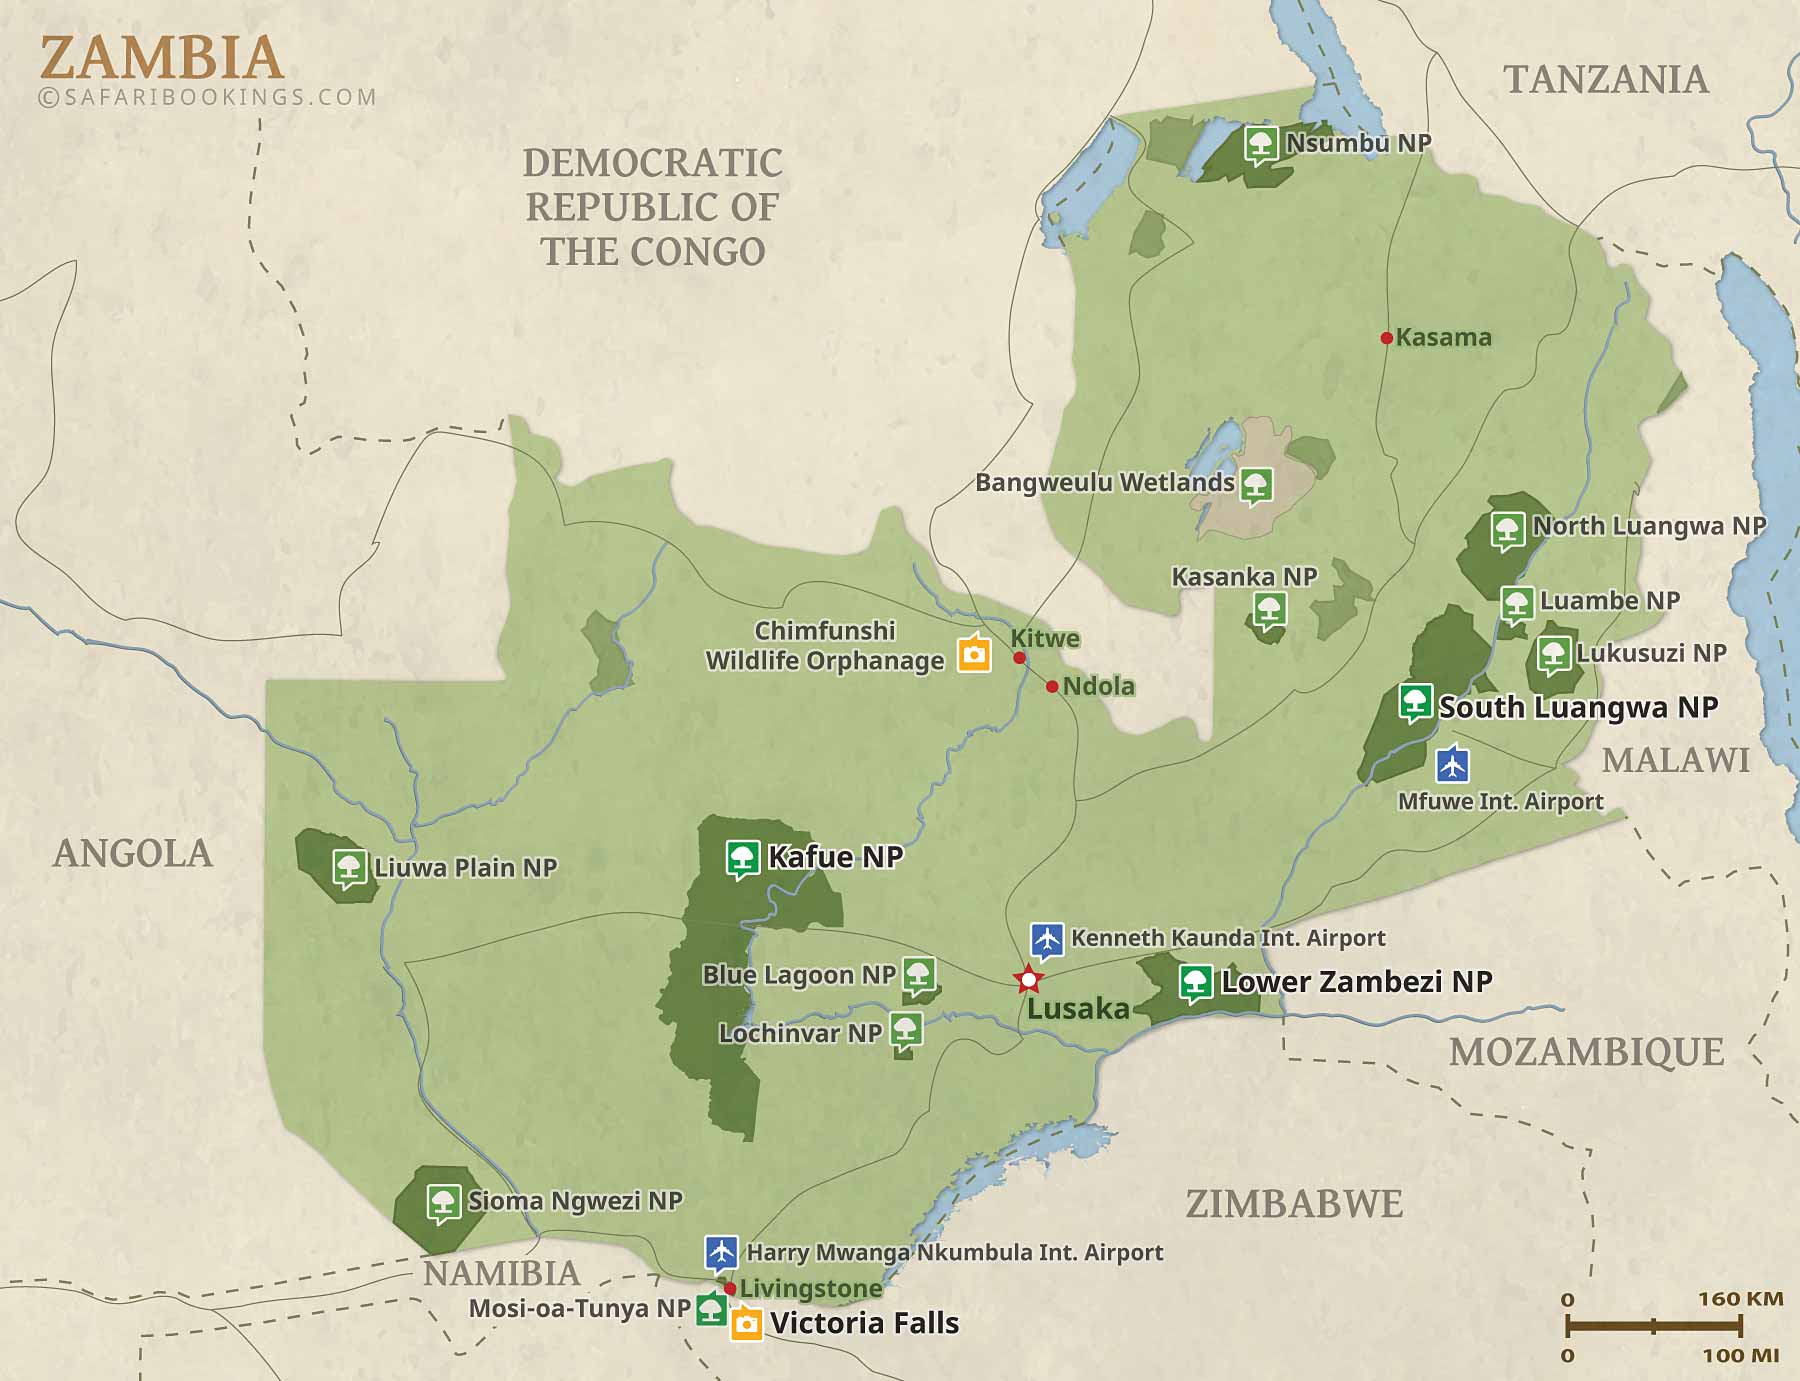 Popular Routes in Zambia